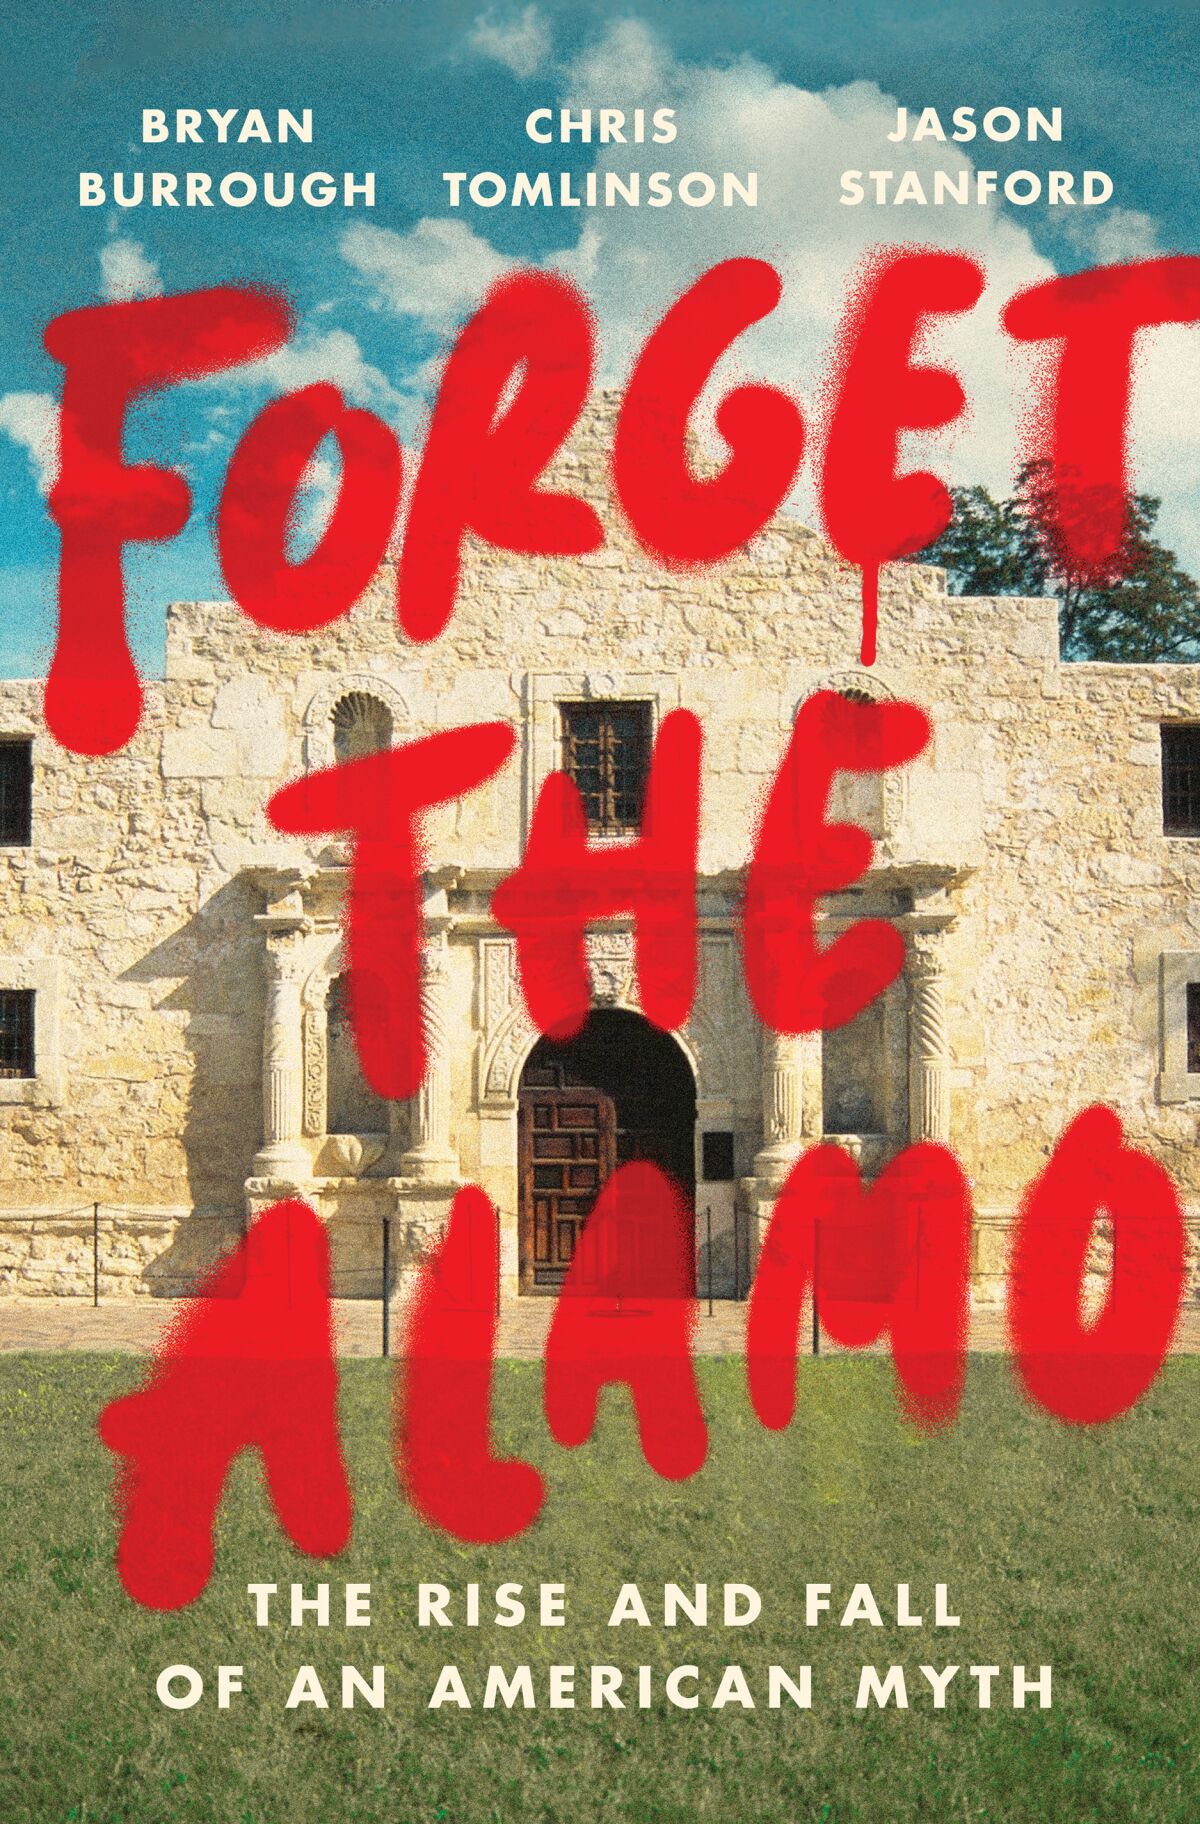 The book jacket for "Forget the Alamo," by Bryan Burrough, Chris Tomlinson and Jason Stanford. Credit: Penguin Press